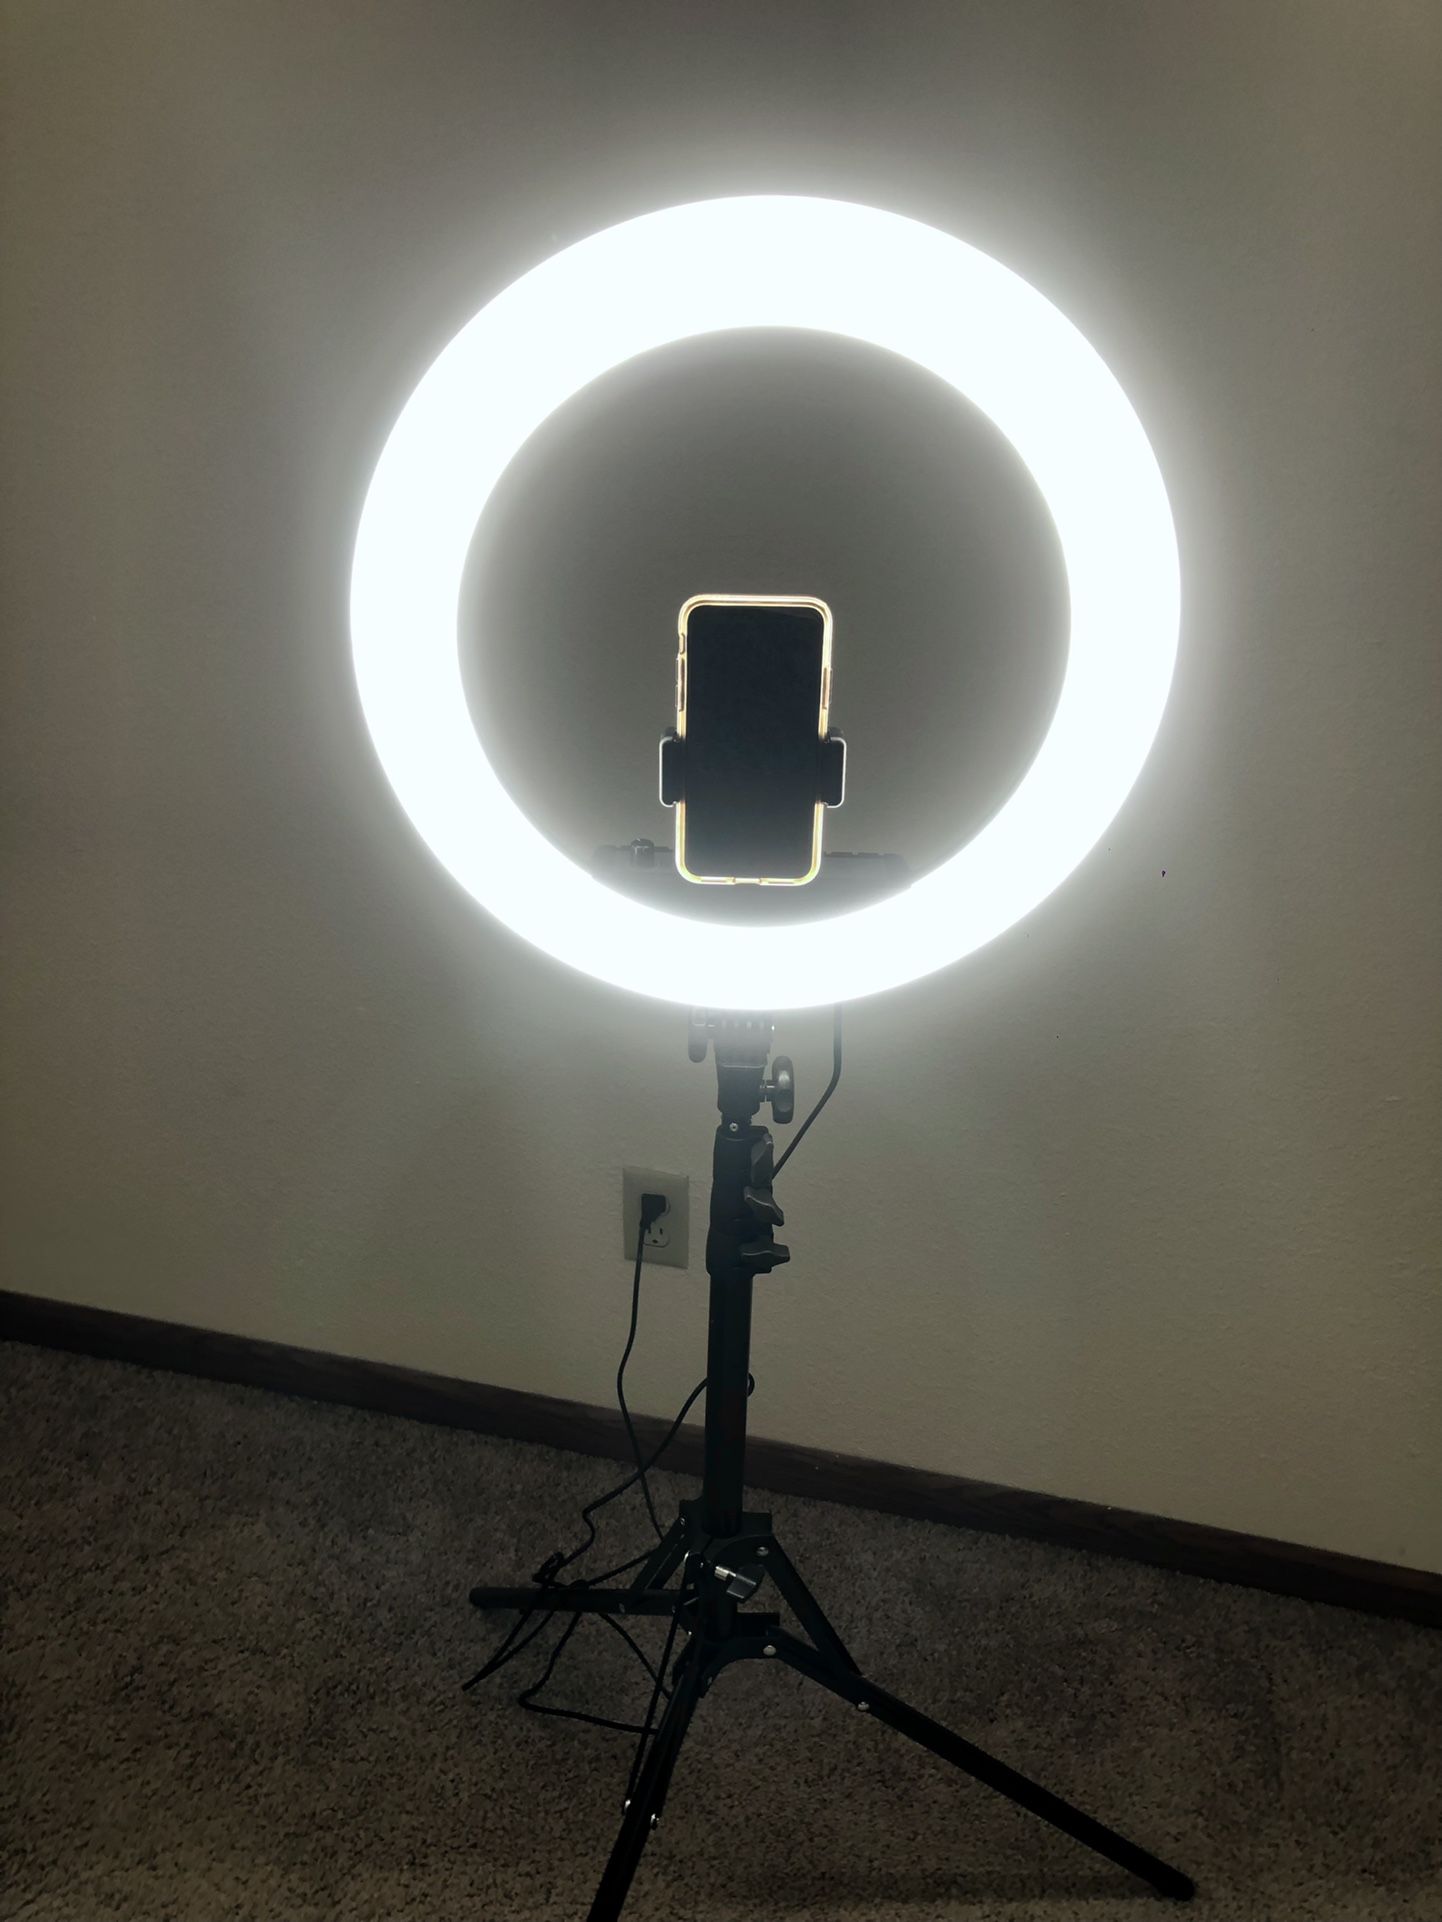 LED video photography 18" ring light